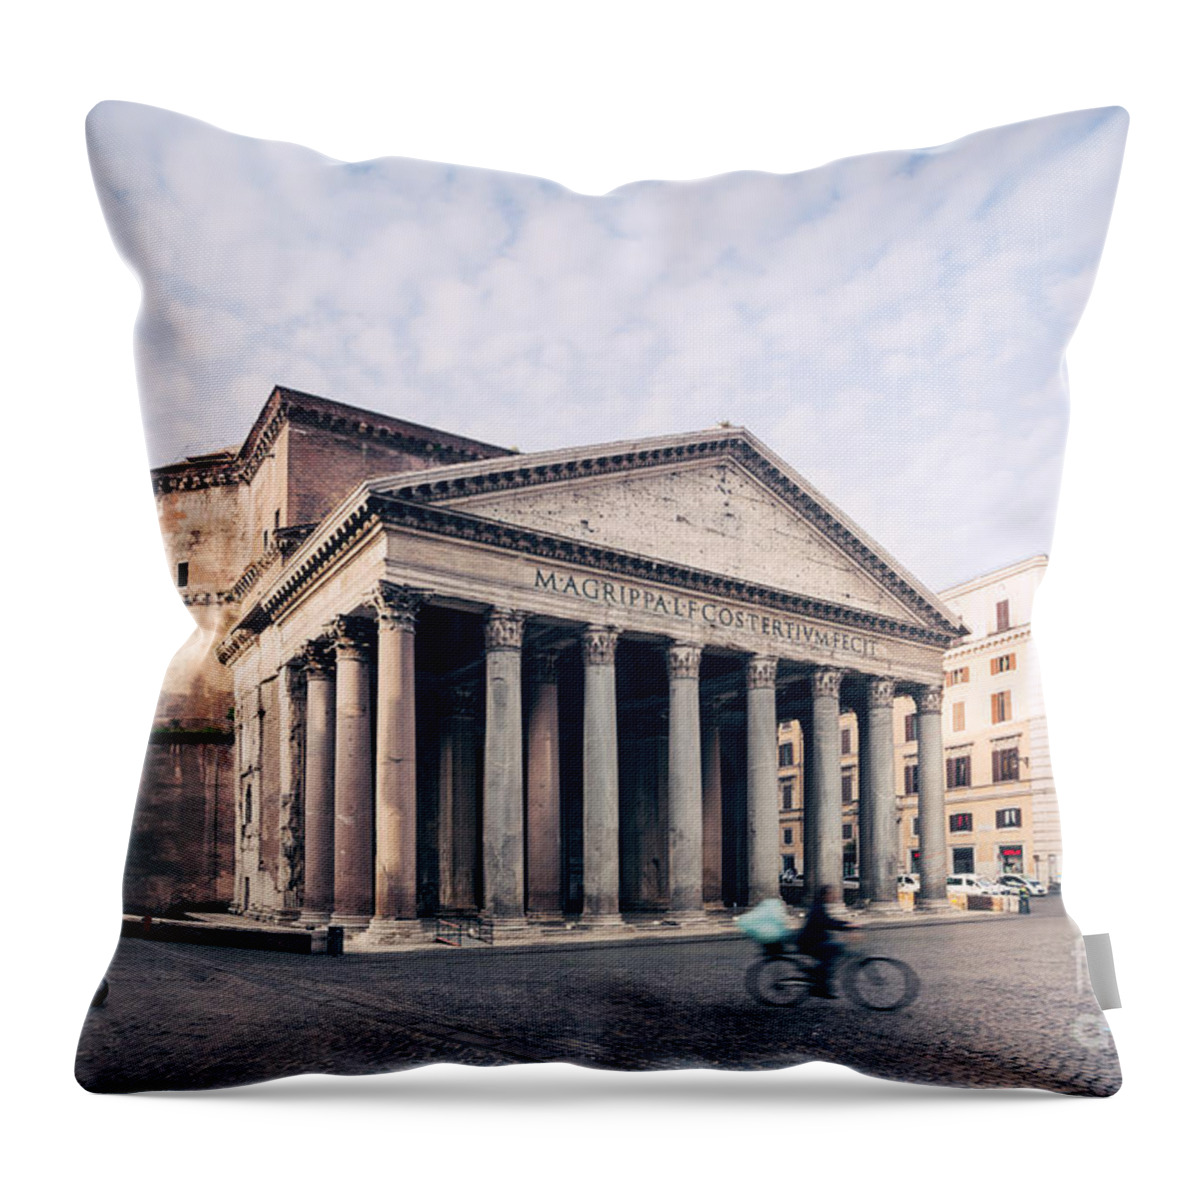 Pantheon Throw Pillow featuring the photograph The Pantheon by Matteo Colombo